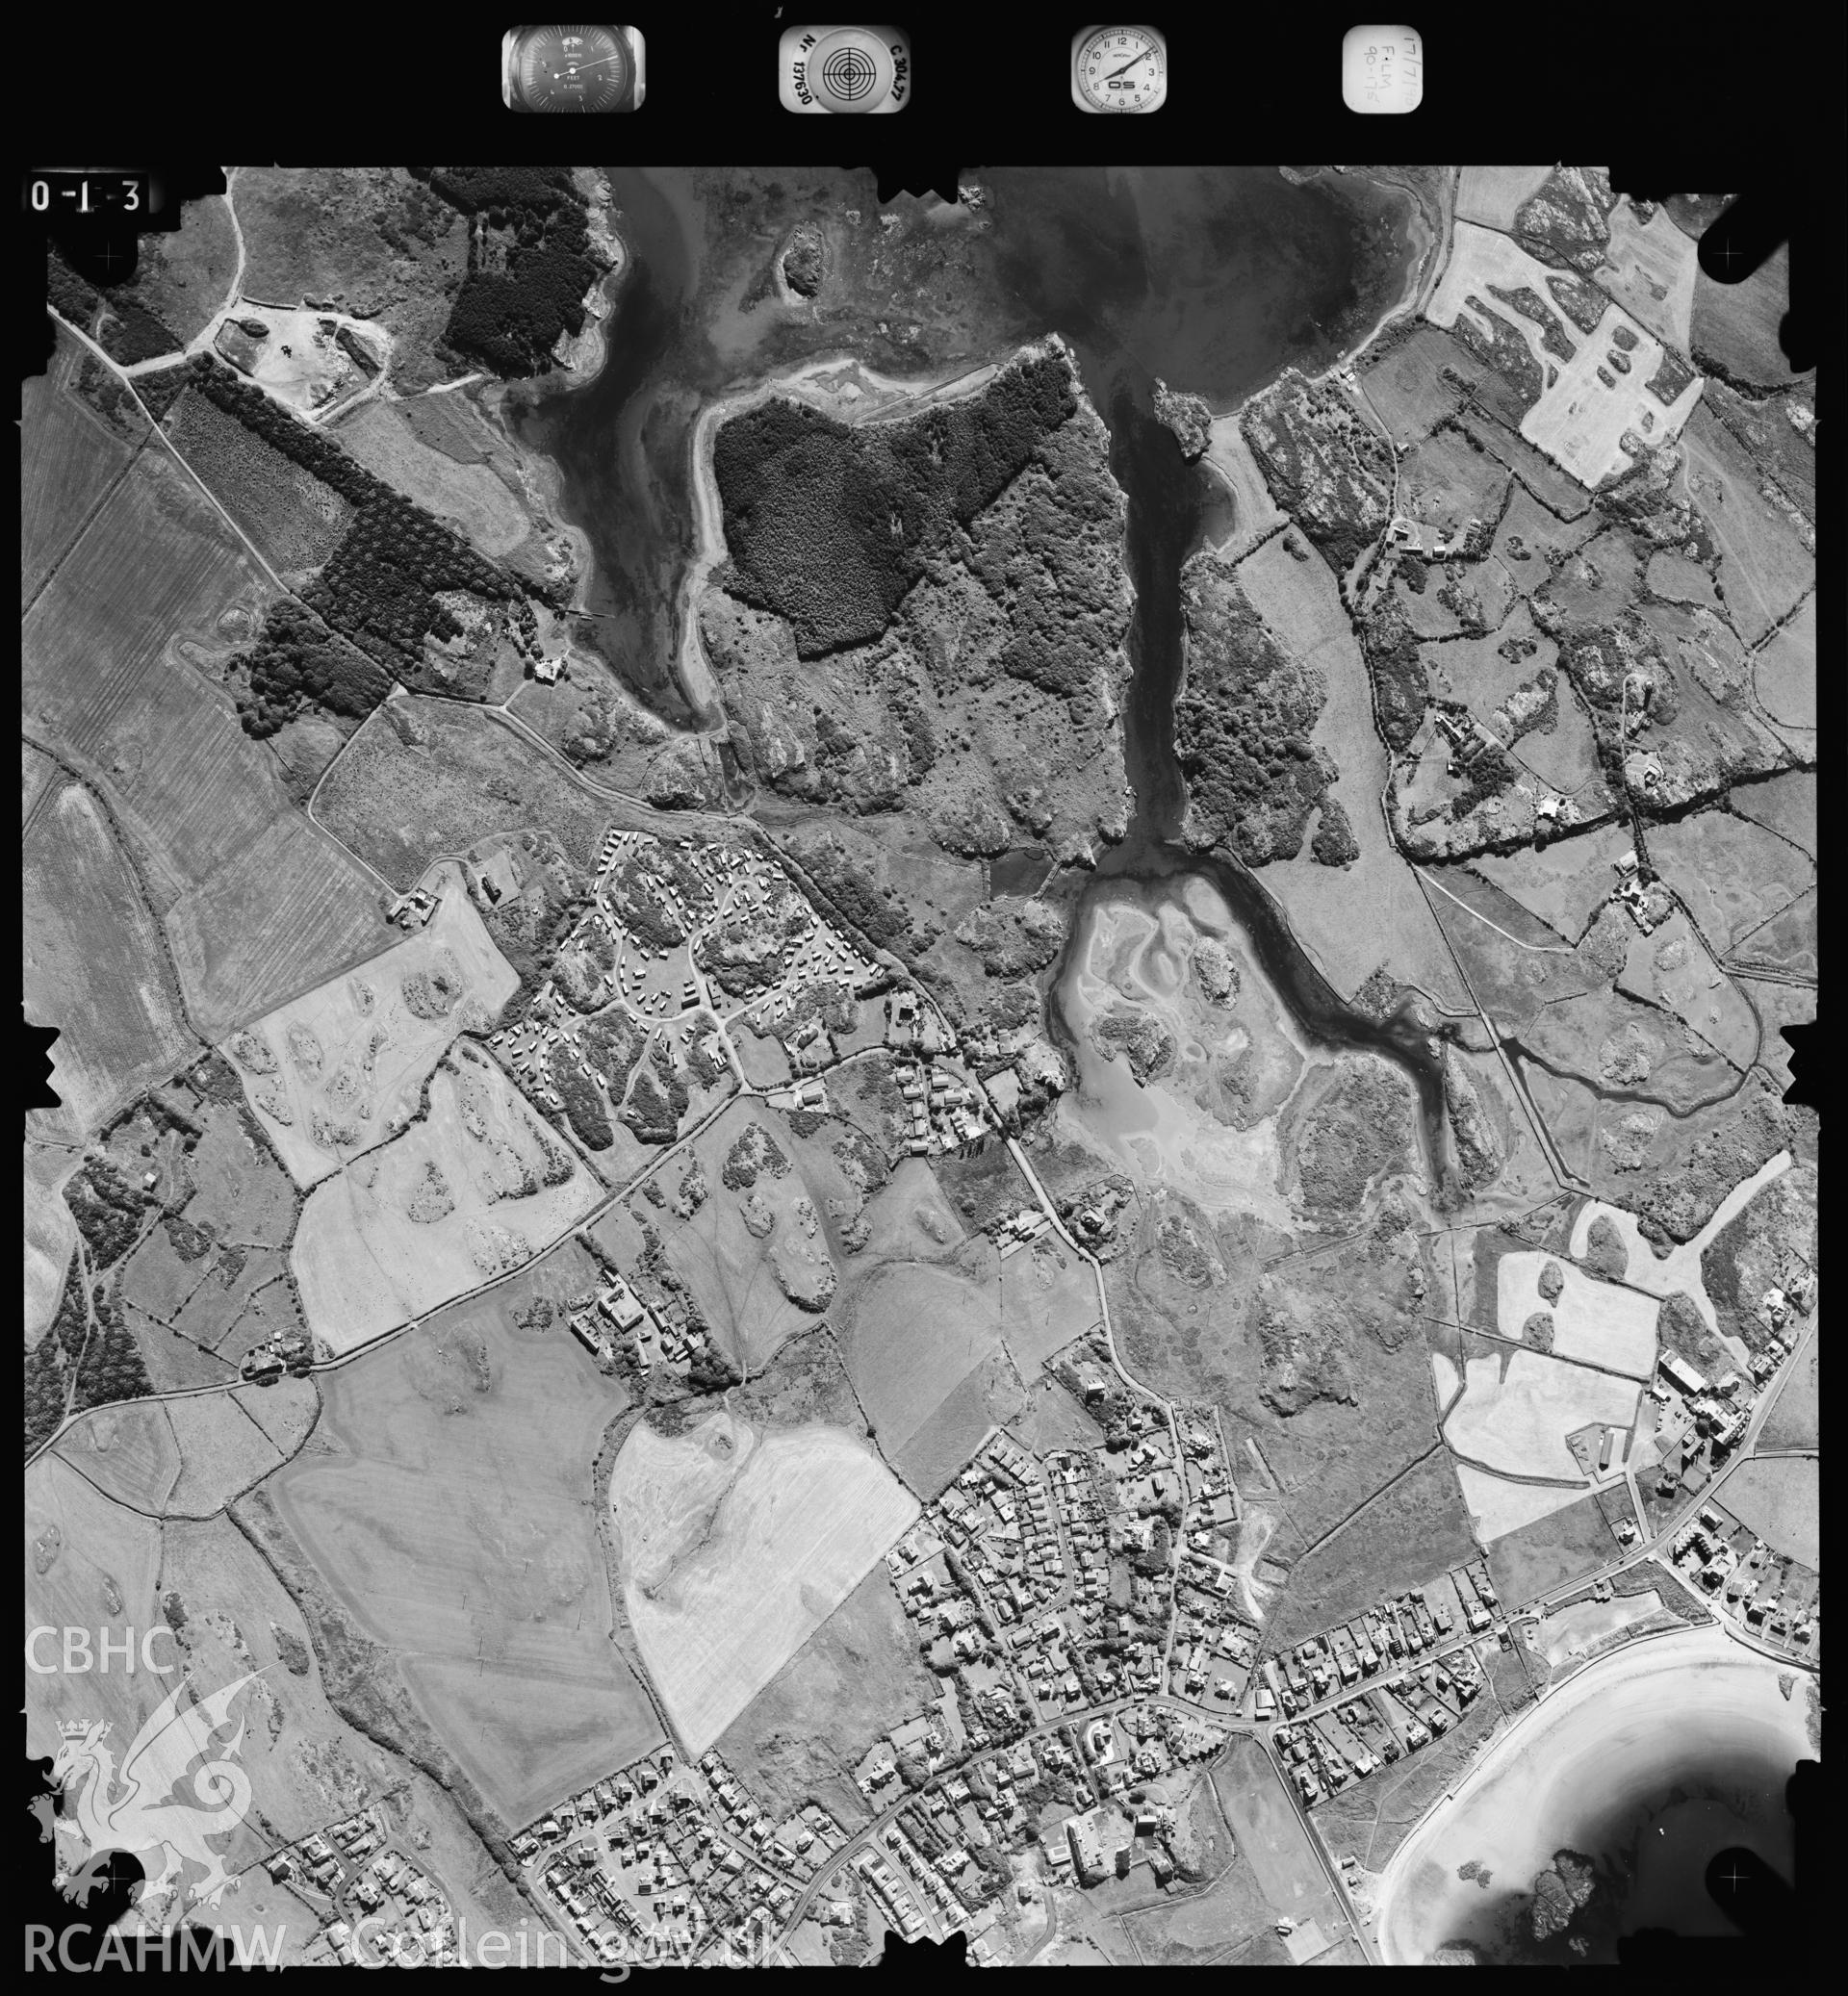 Digitized copy of an aerial photograph showing the area around Trearddur Bay, taken by Ordnance Survey, 1990.